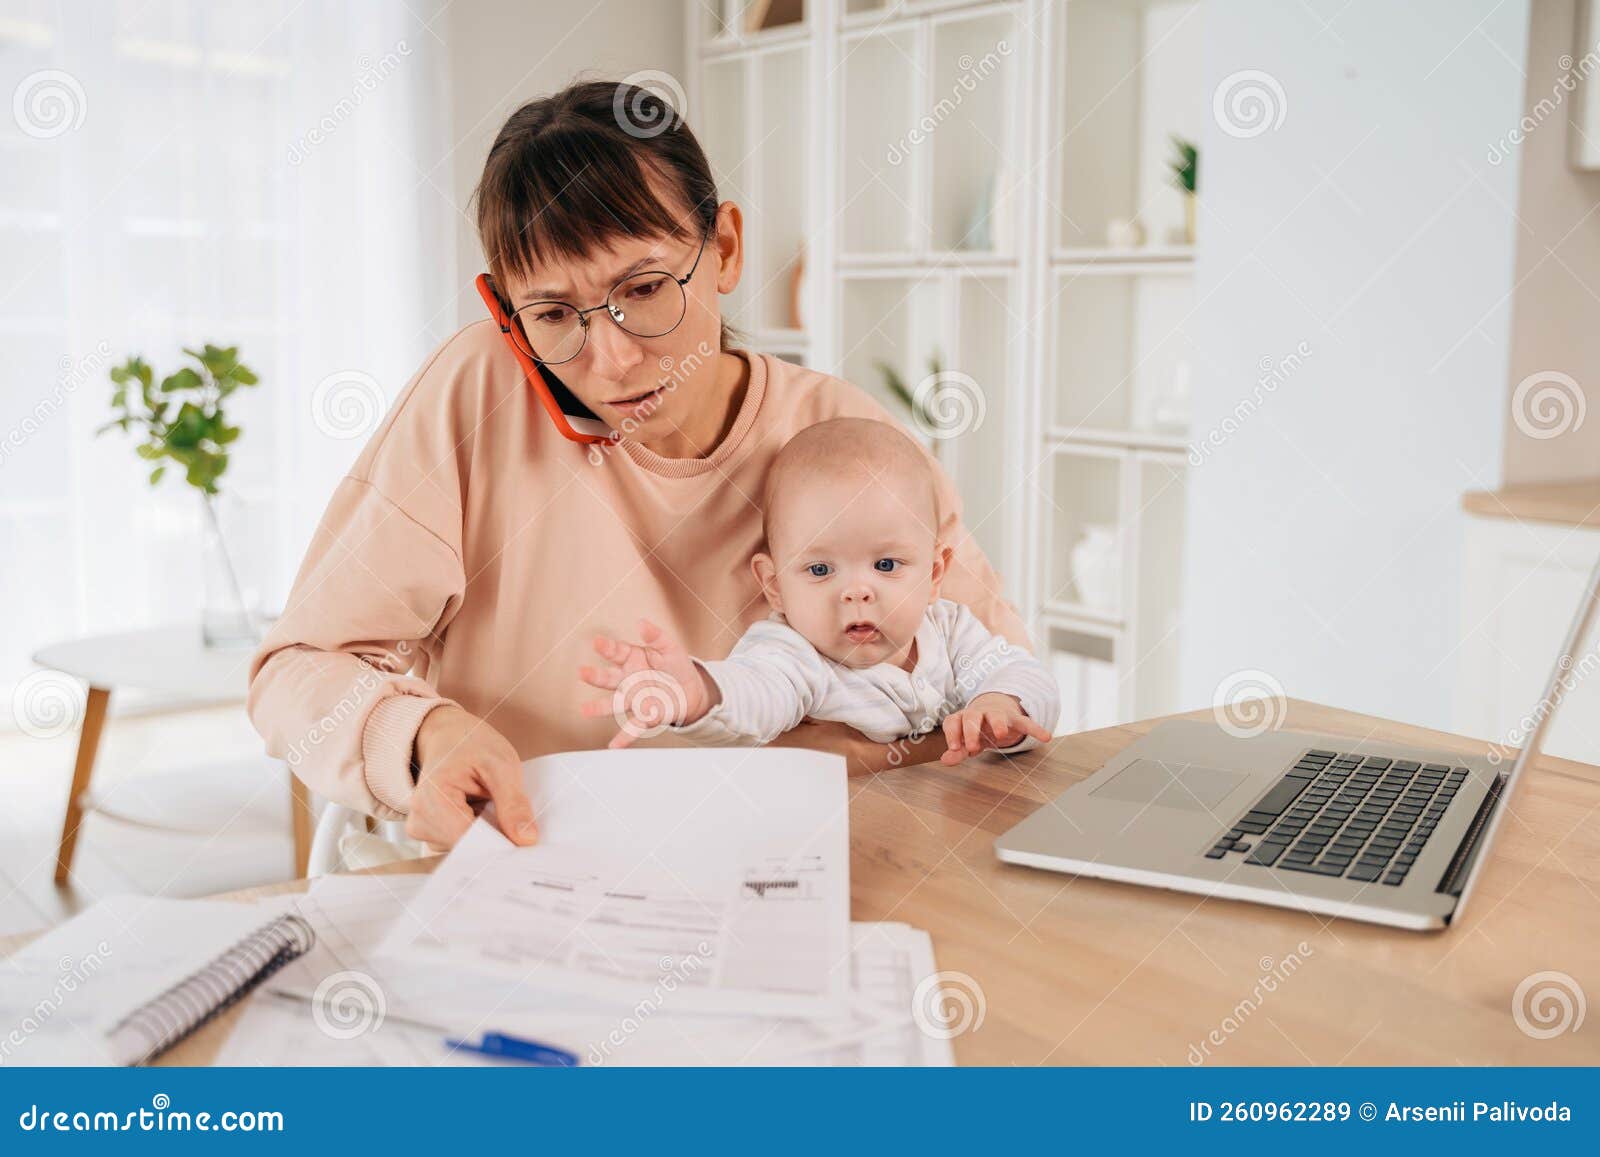 stressed upset mother trying to work from home with little child